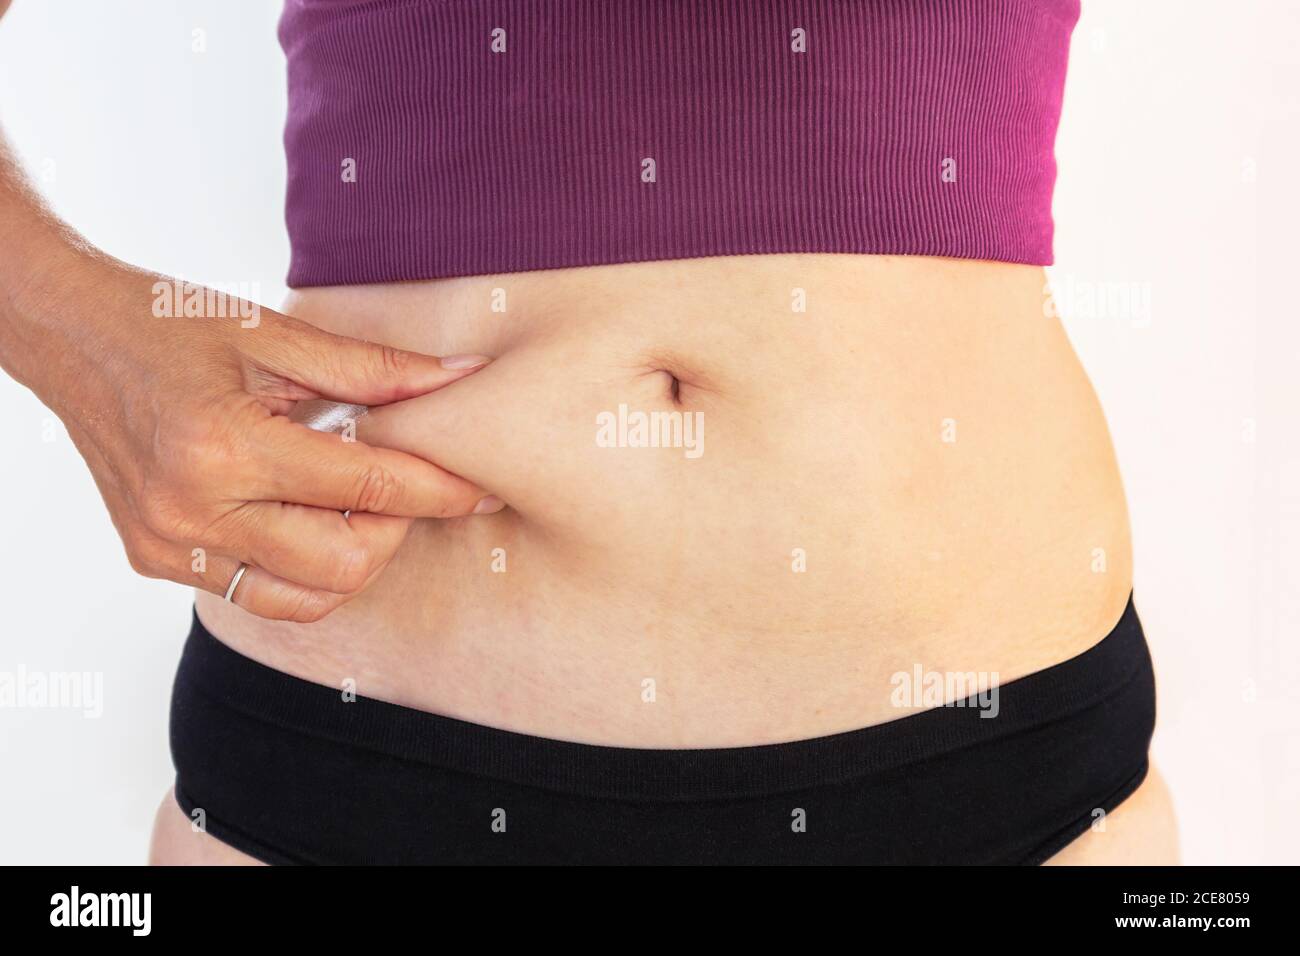 Mature woman pinching her belly fat, body care and fitness concept Stock Photo